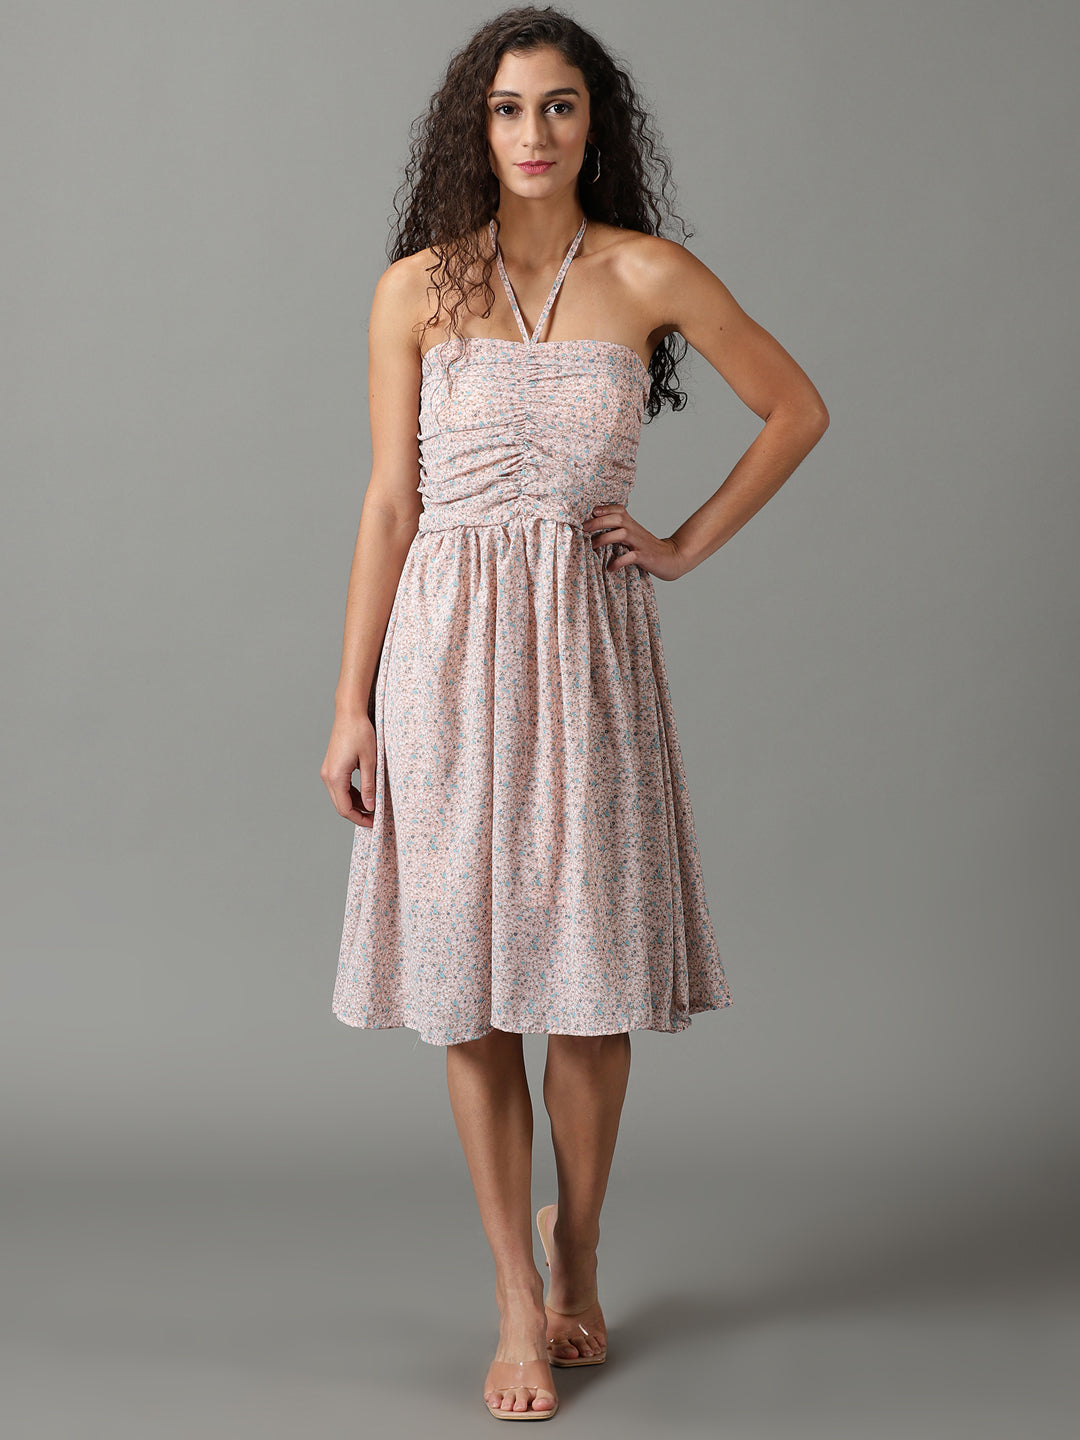 Women's Peach Printed Fit and Flare Dress